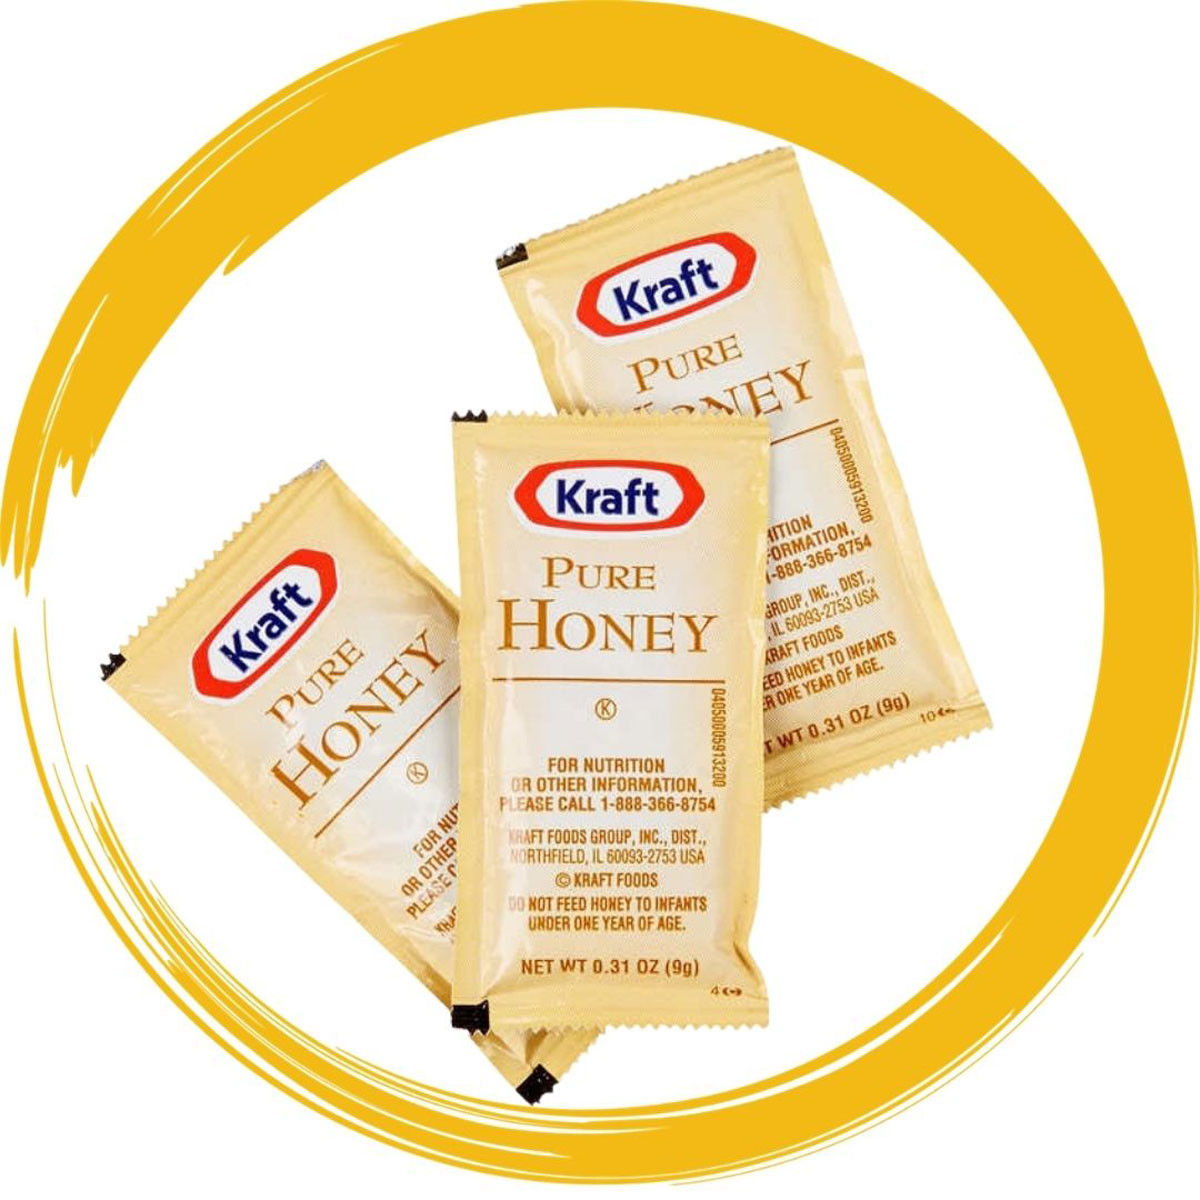 How much honey is in a Kraft packet?